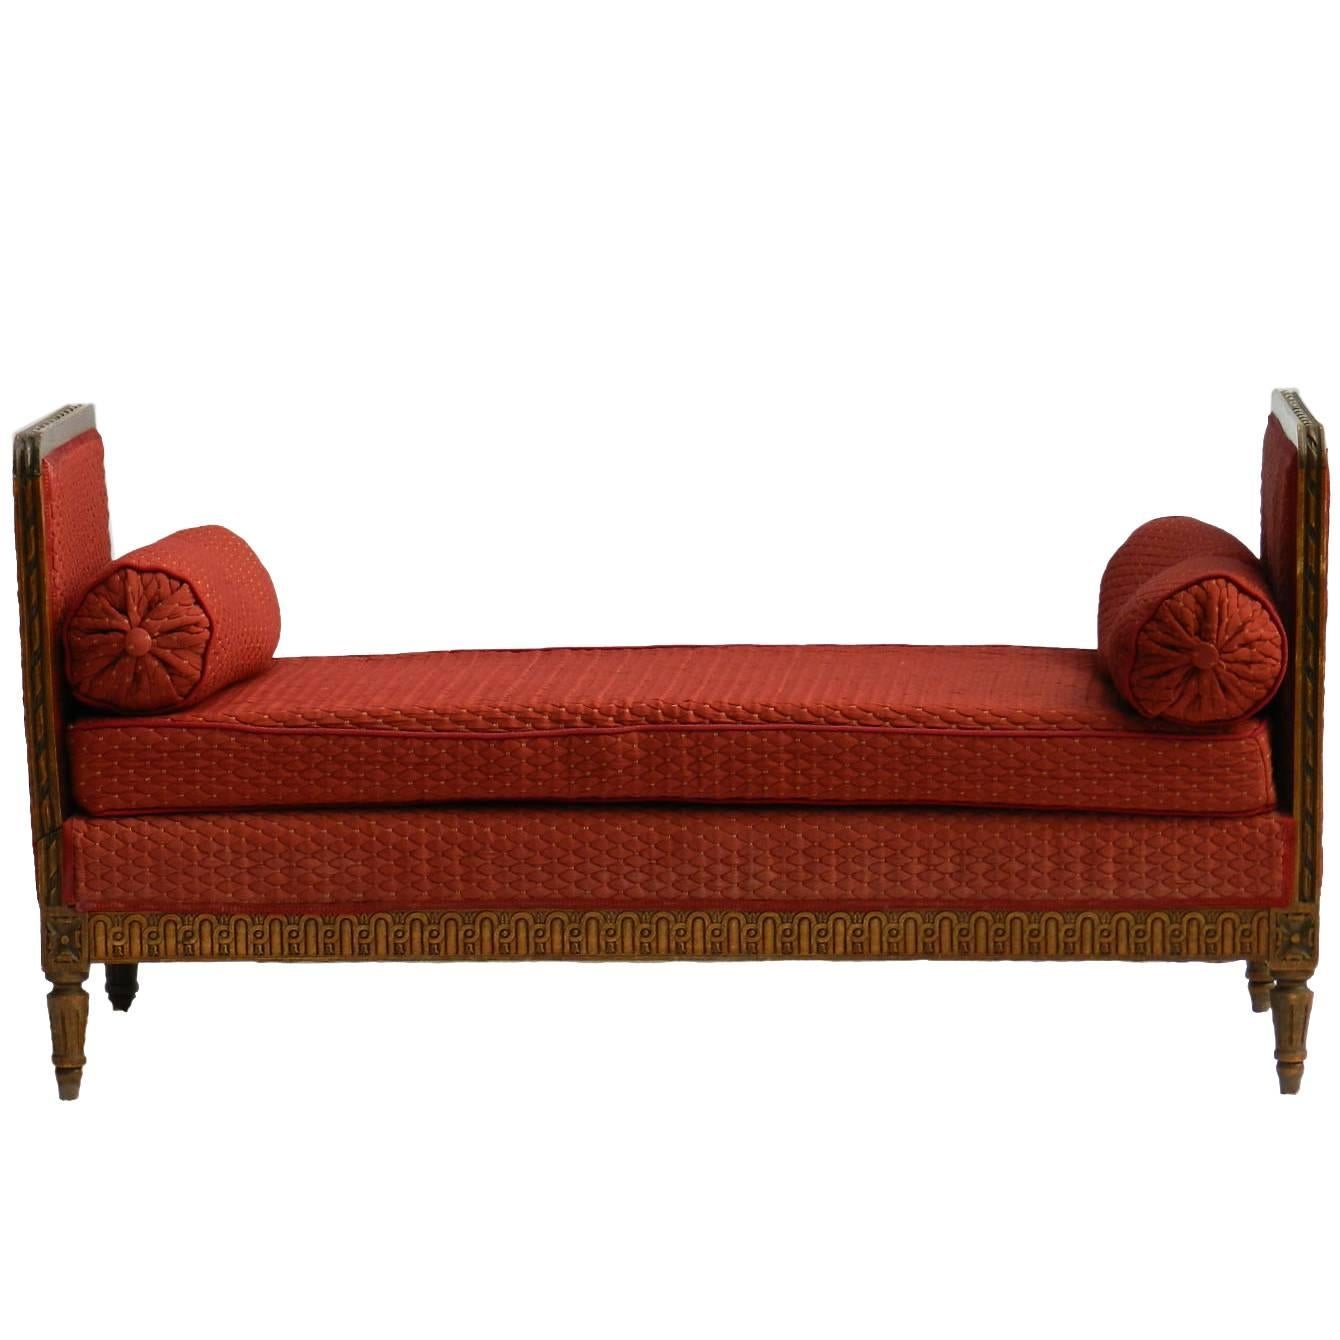 French Daybed Sofa or Single Chaise Longue in Oak, circa 1910-1920 Single Bed